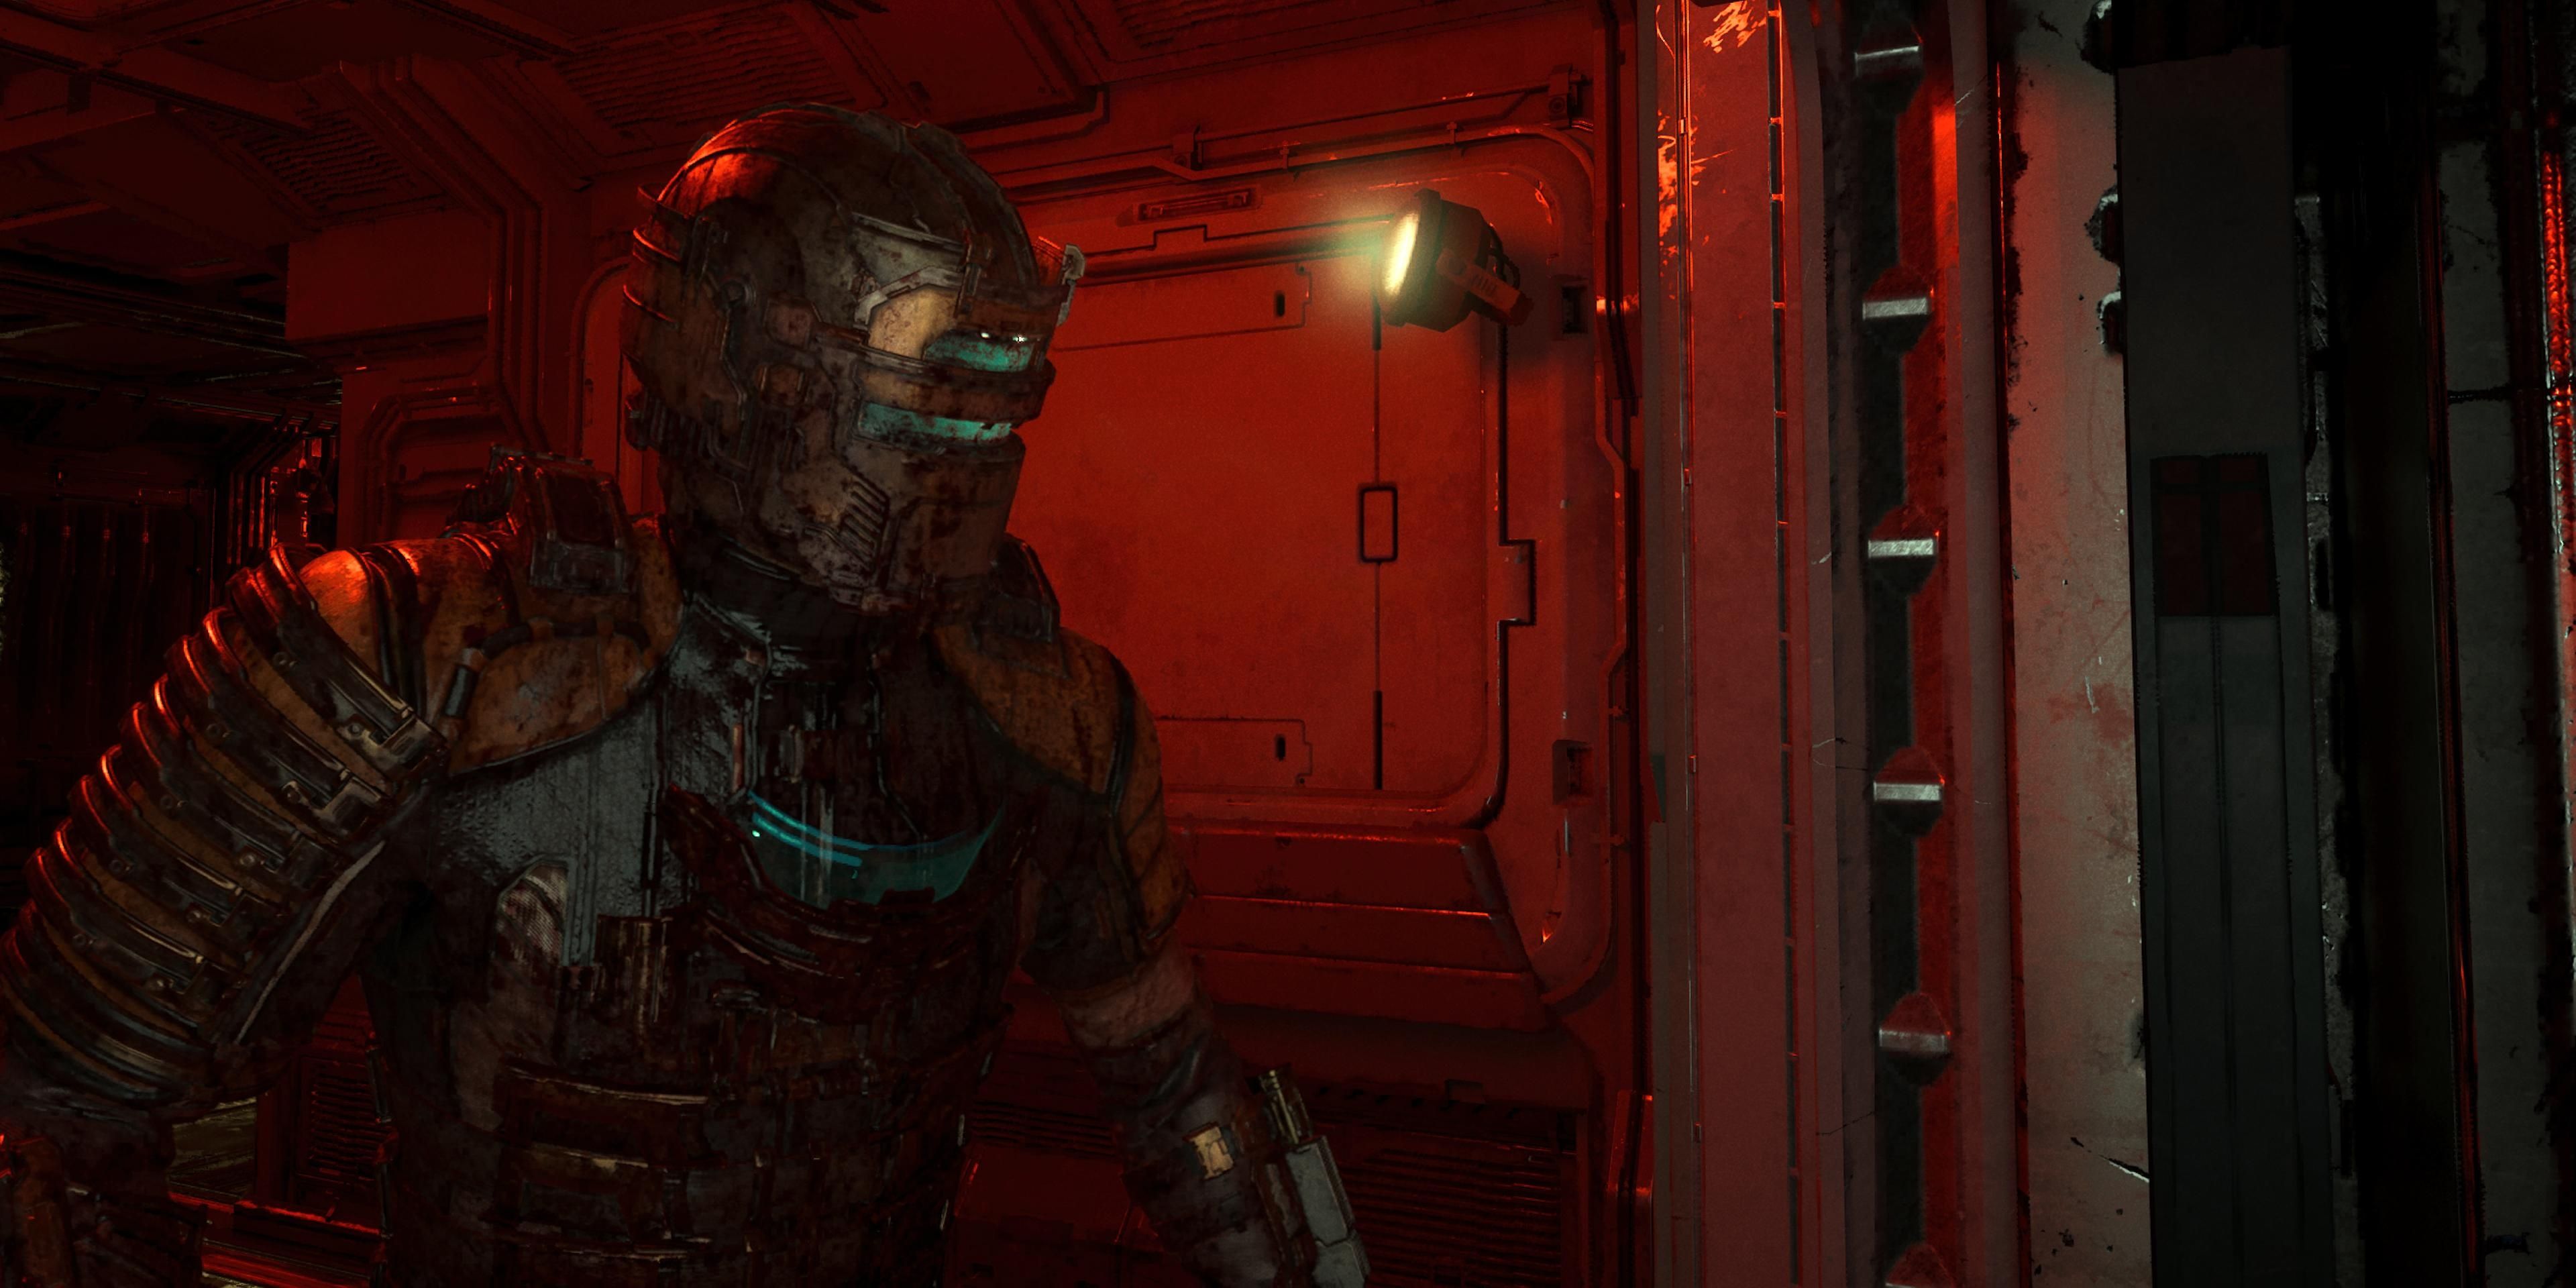 Isaac standing in the glow of a red light inside the Ishimura in Dead Space